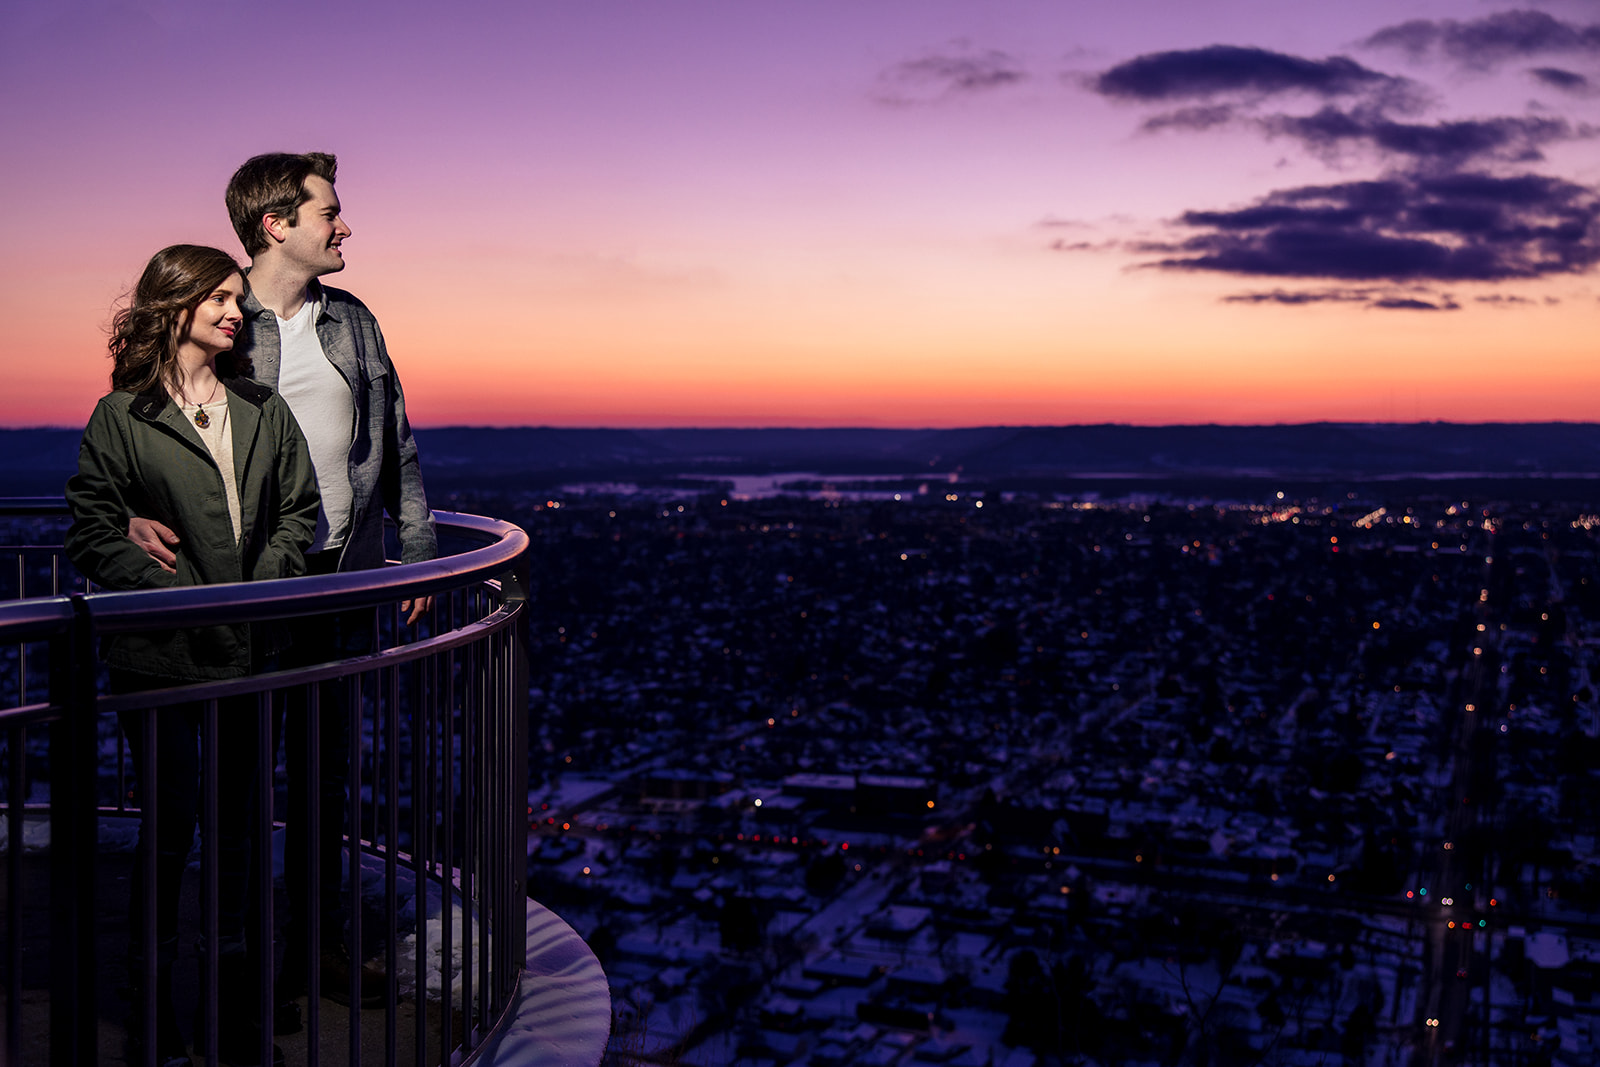 Grandad Bluff Magic: Lindsay and Greg's Engagement Session by Jeff Wiswell of J.L. Wiswell Photography, Onalaska, WI